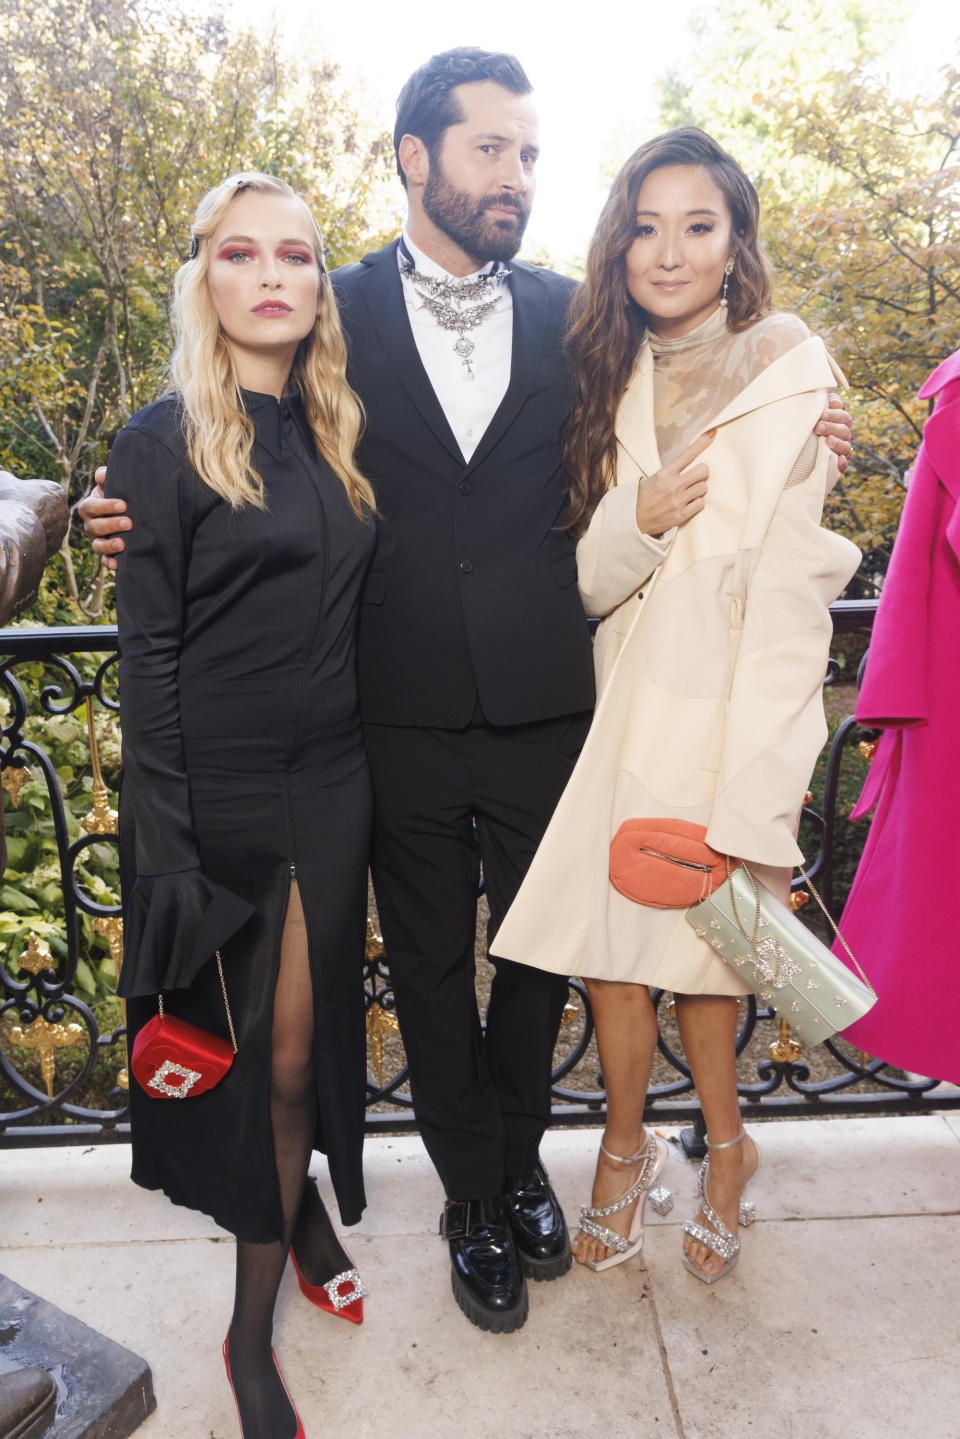 Roger Vivier creative director Gherardo Felloni with actresses Camille Razat (left) and Ashley Park, both of the hit Netflix show “Emily in Paris.” - Credit: Courtesy of Roger Vivier